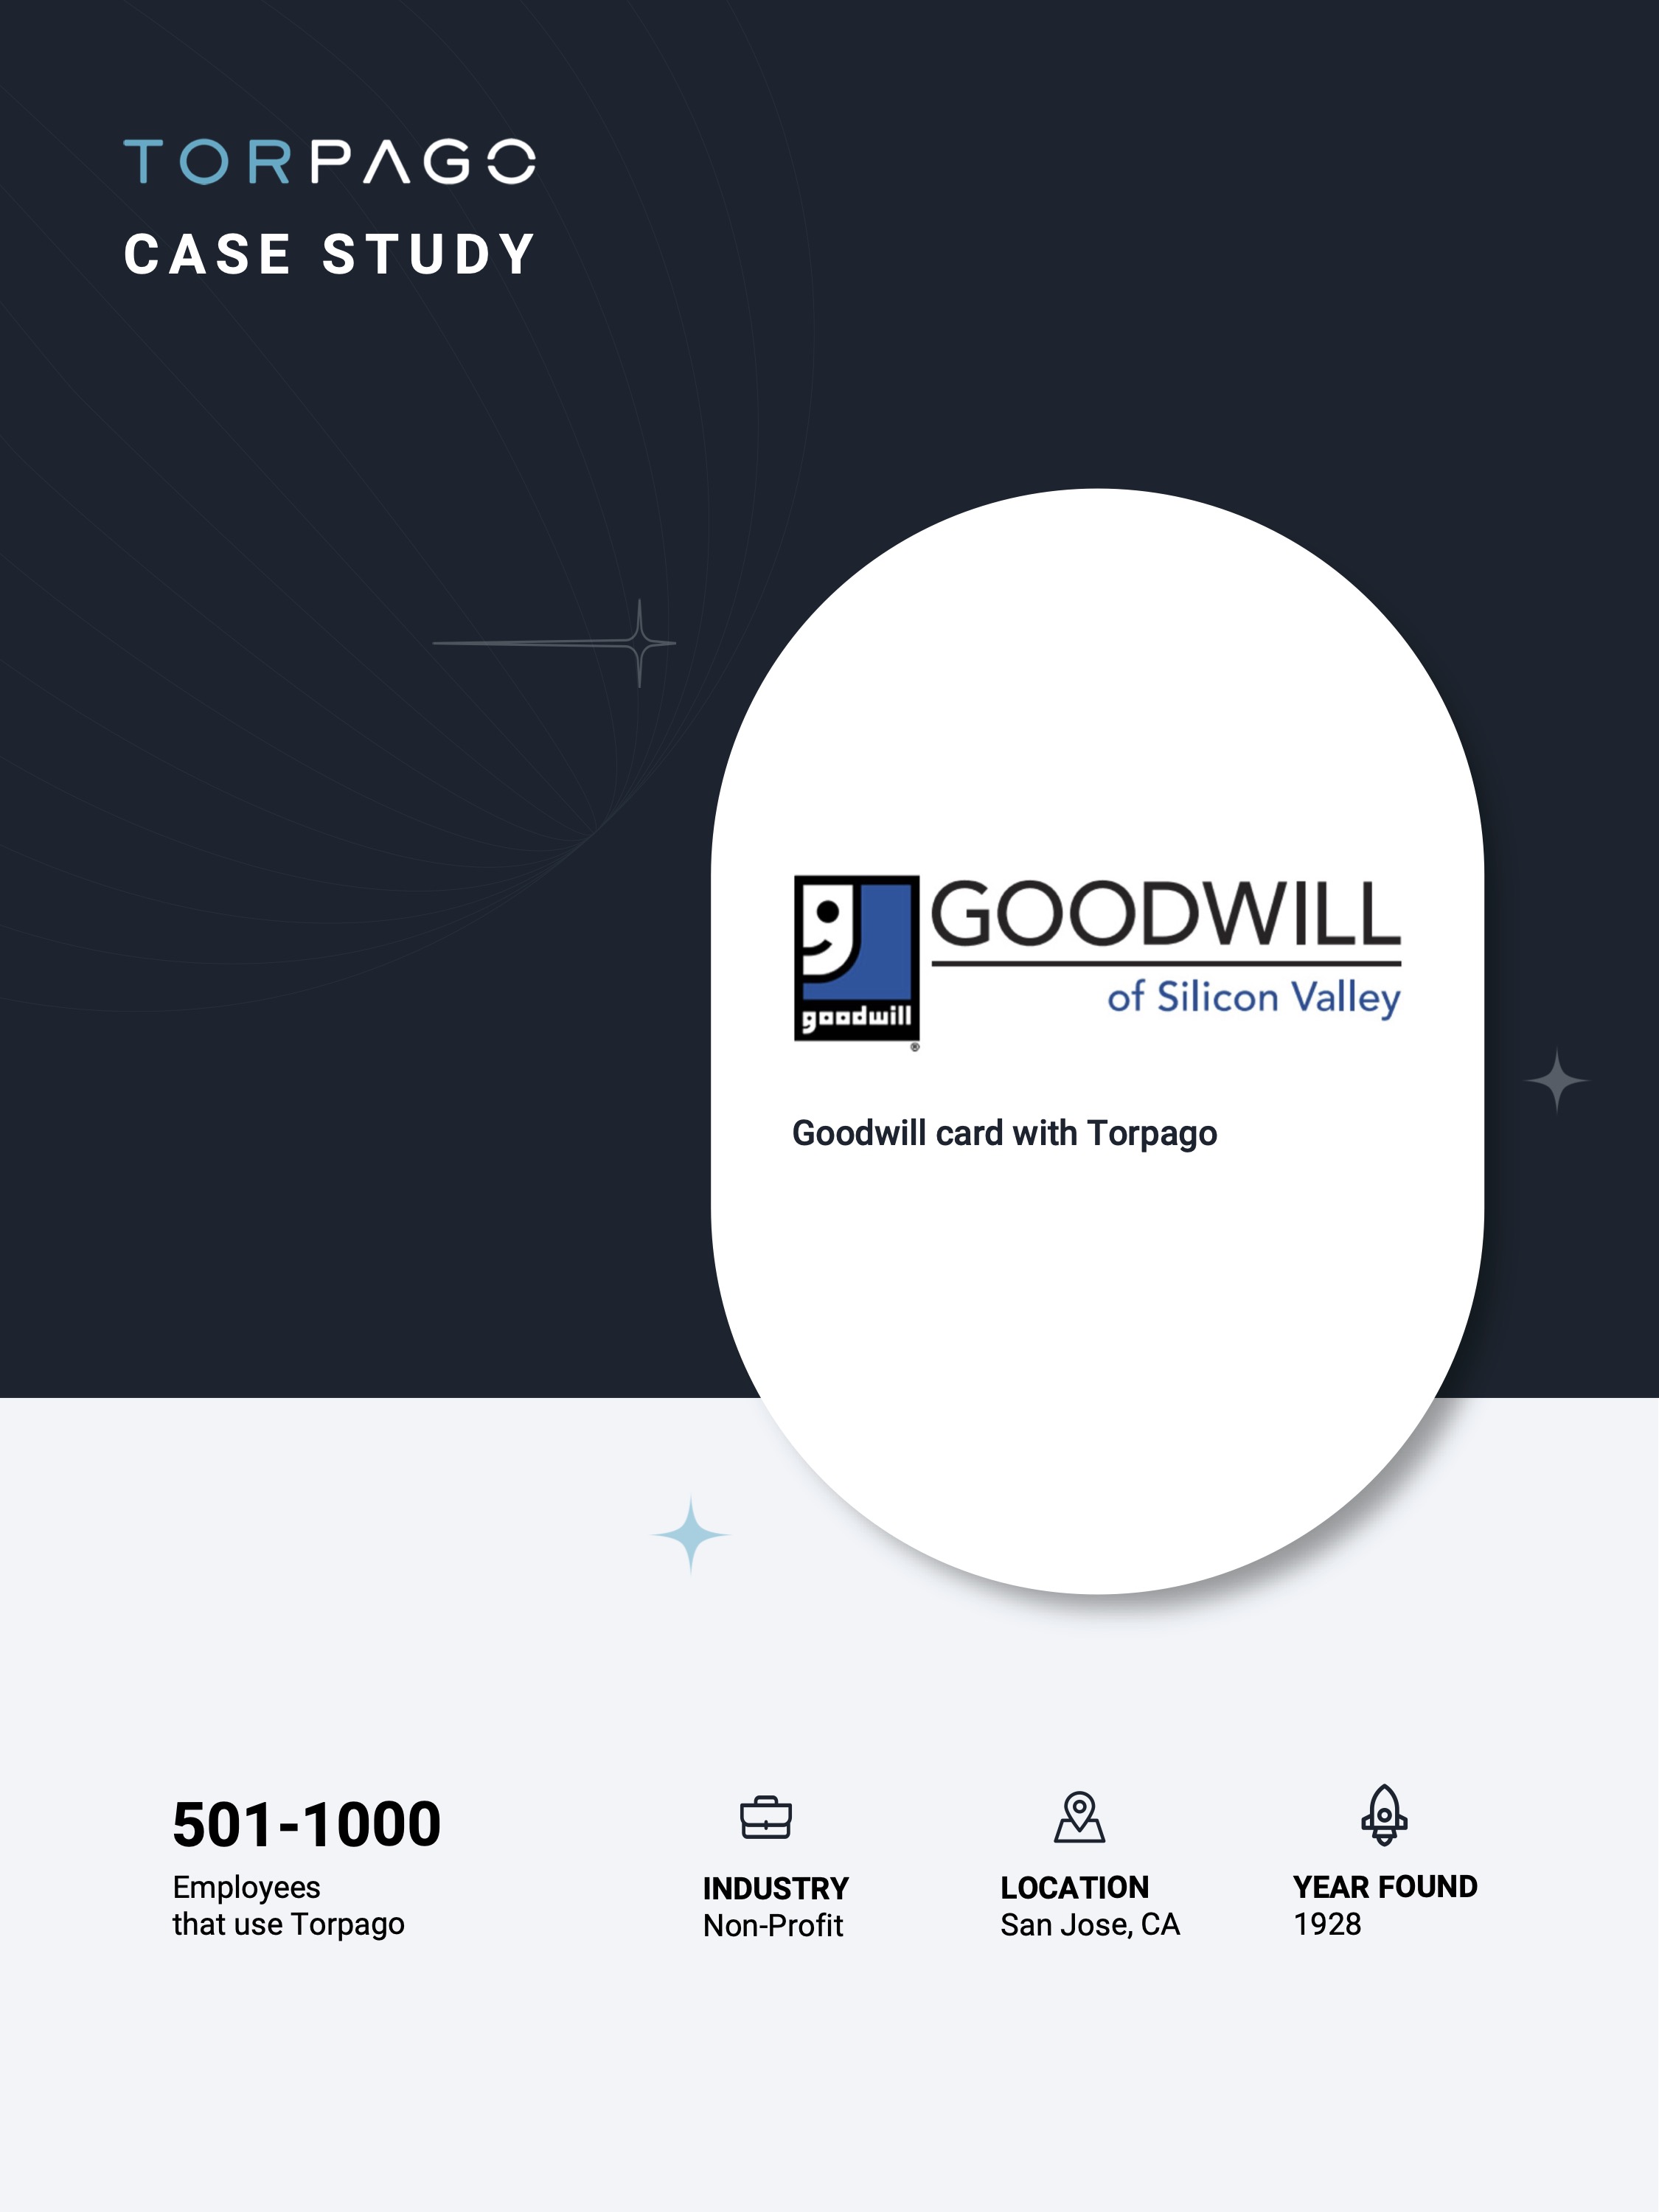 Goodwill-Case Study-cover